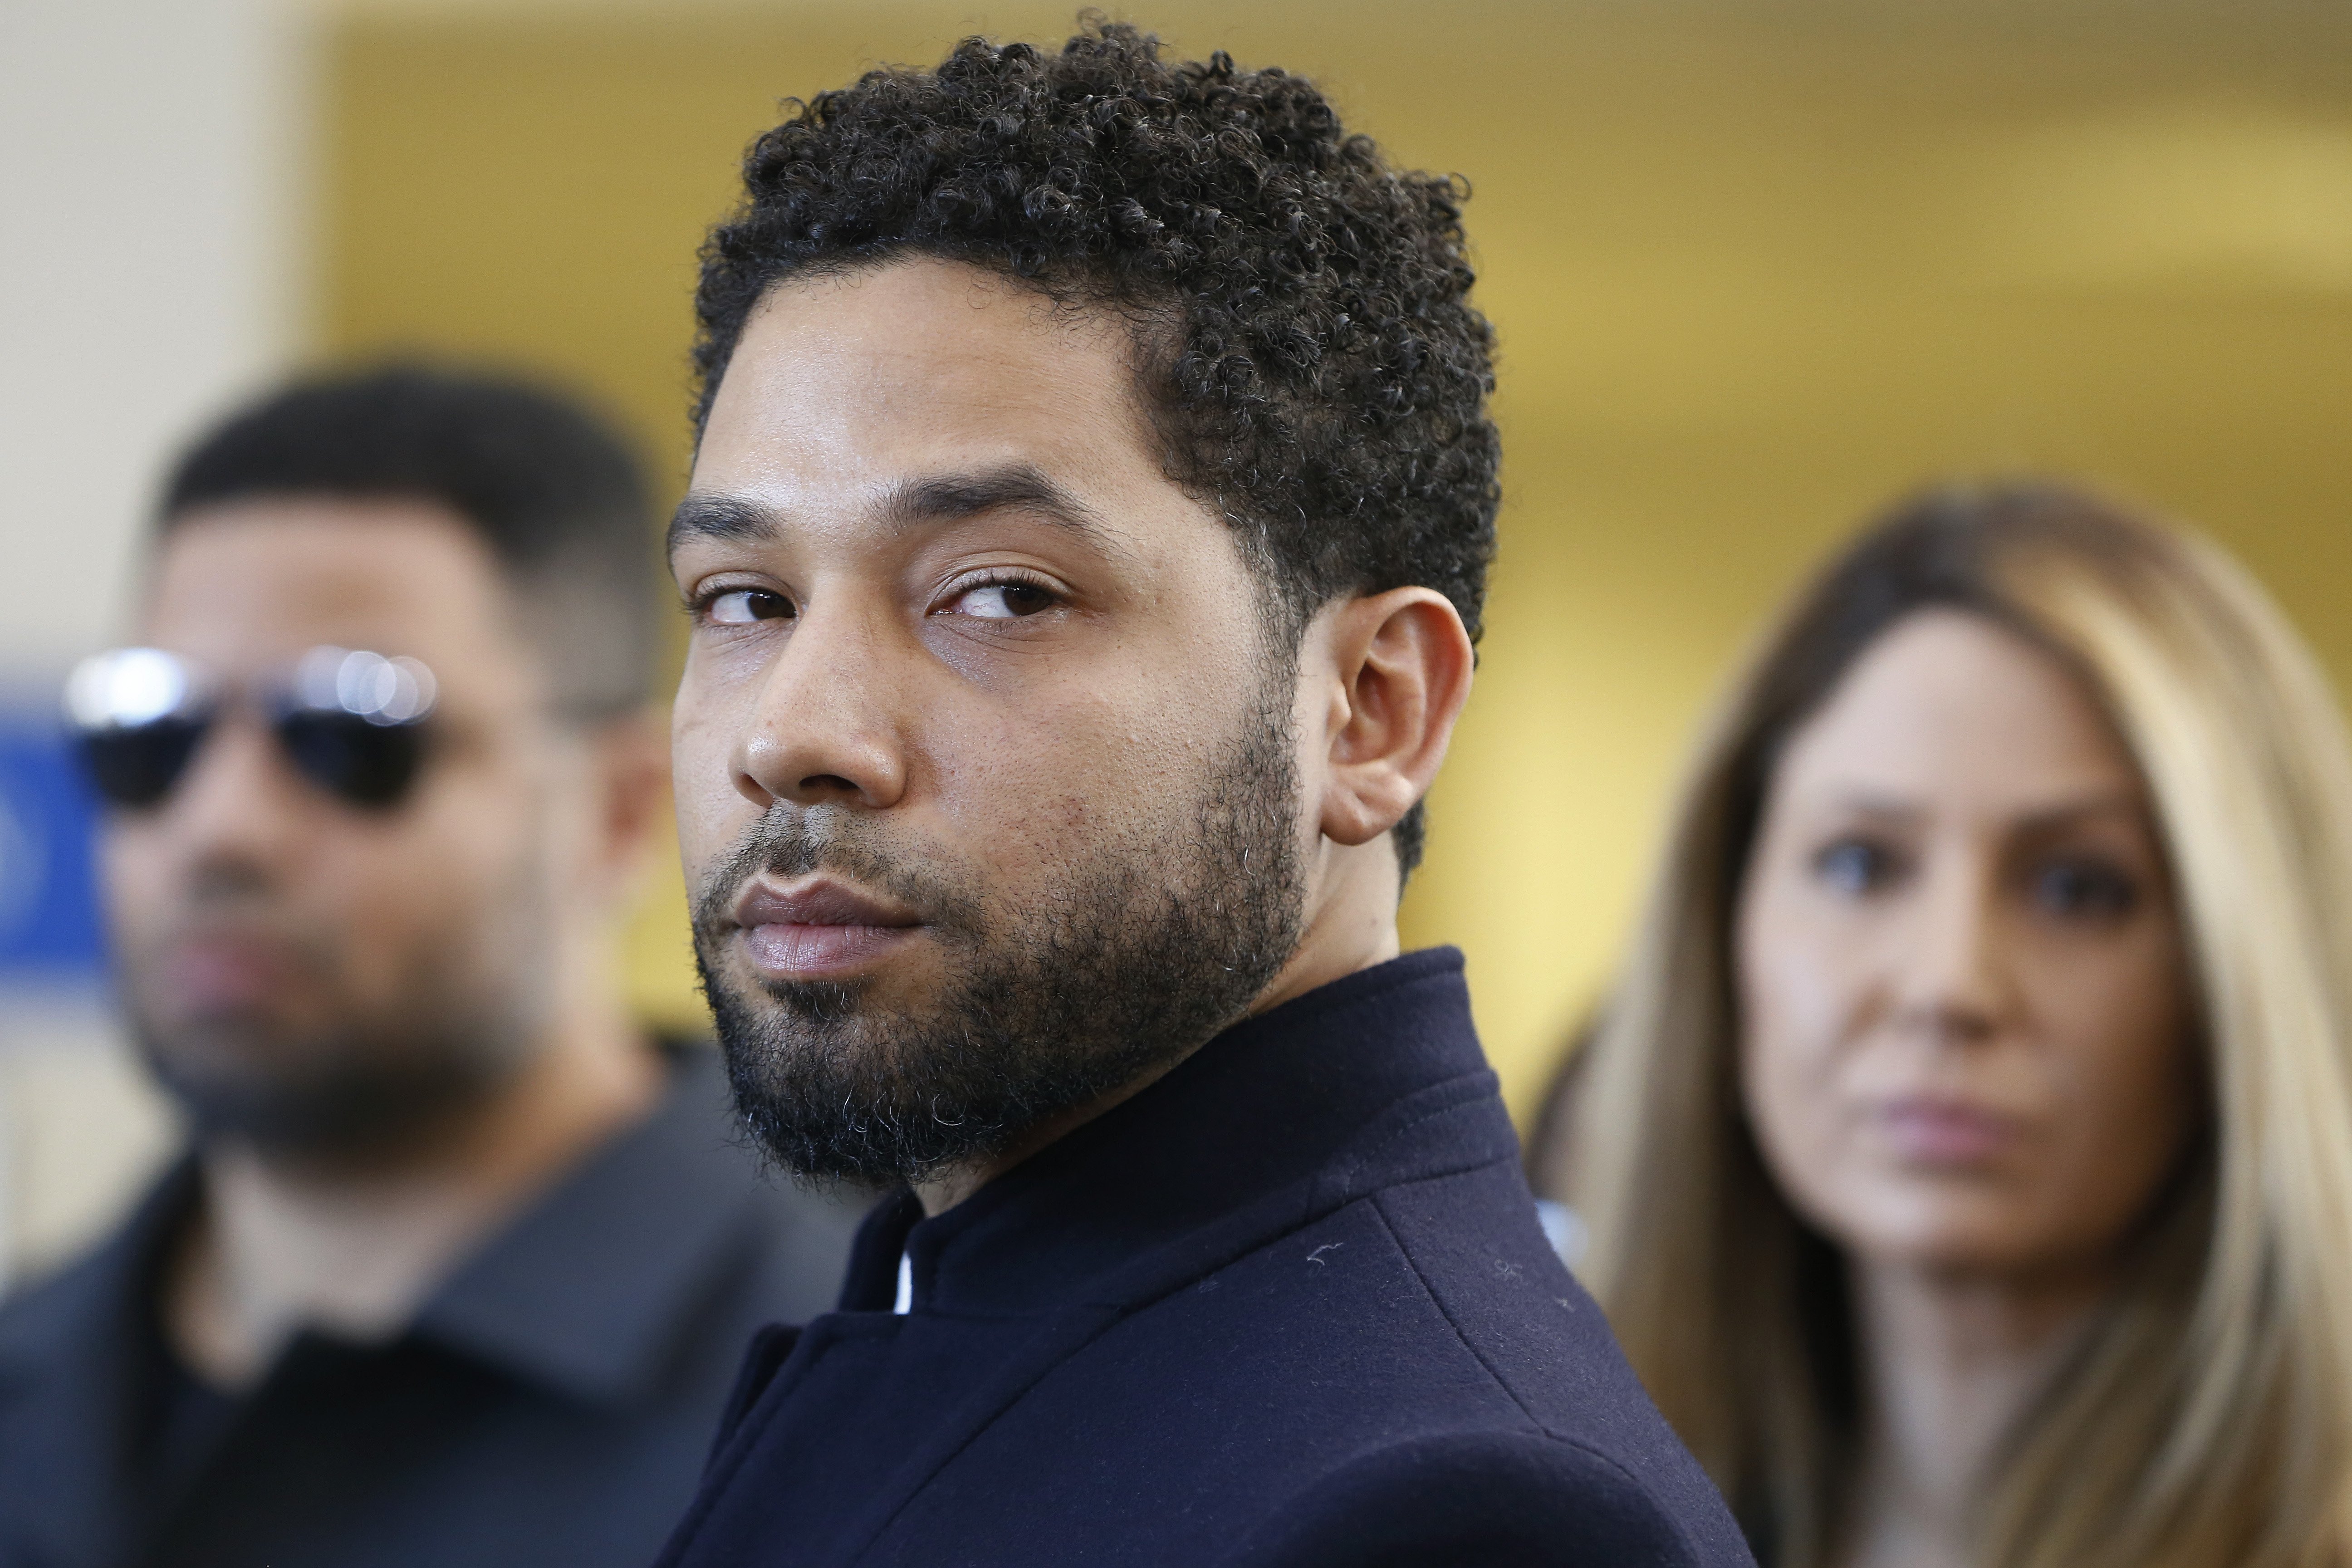 Accused actor Jussie Smollett after his appearance at Leighton Courthouse in March 2019 in Chicago. | Photo: Getty Images